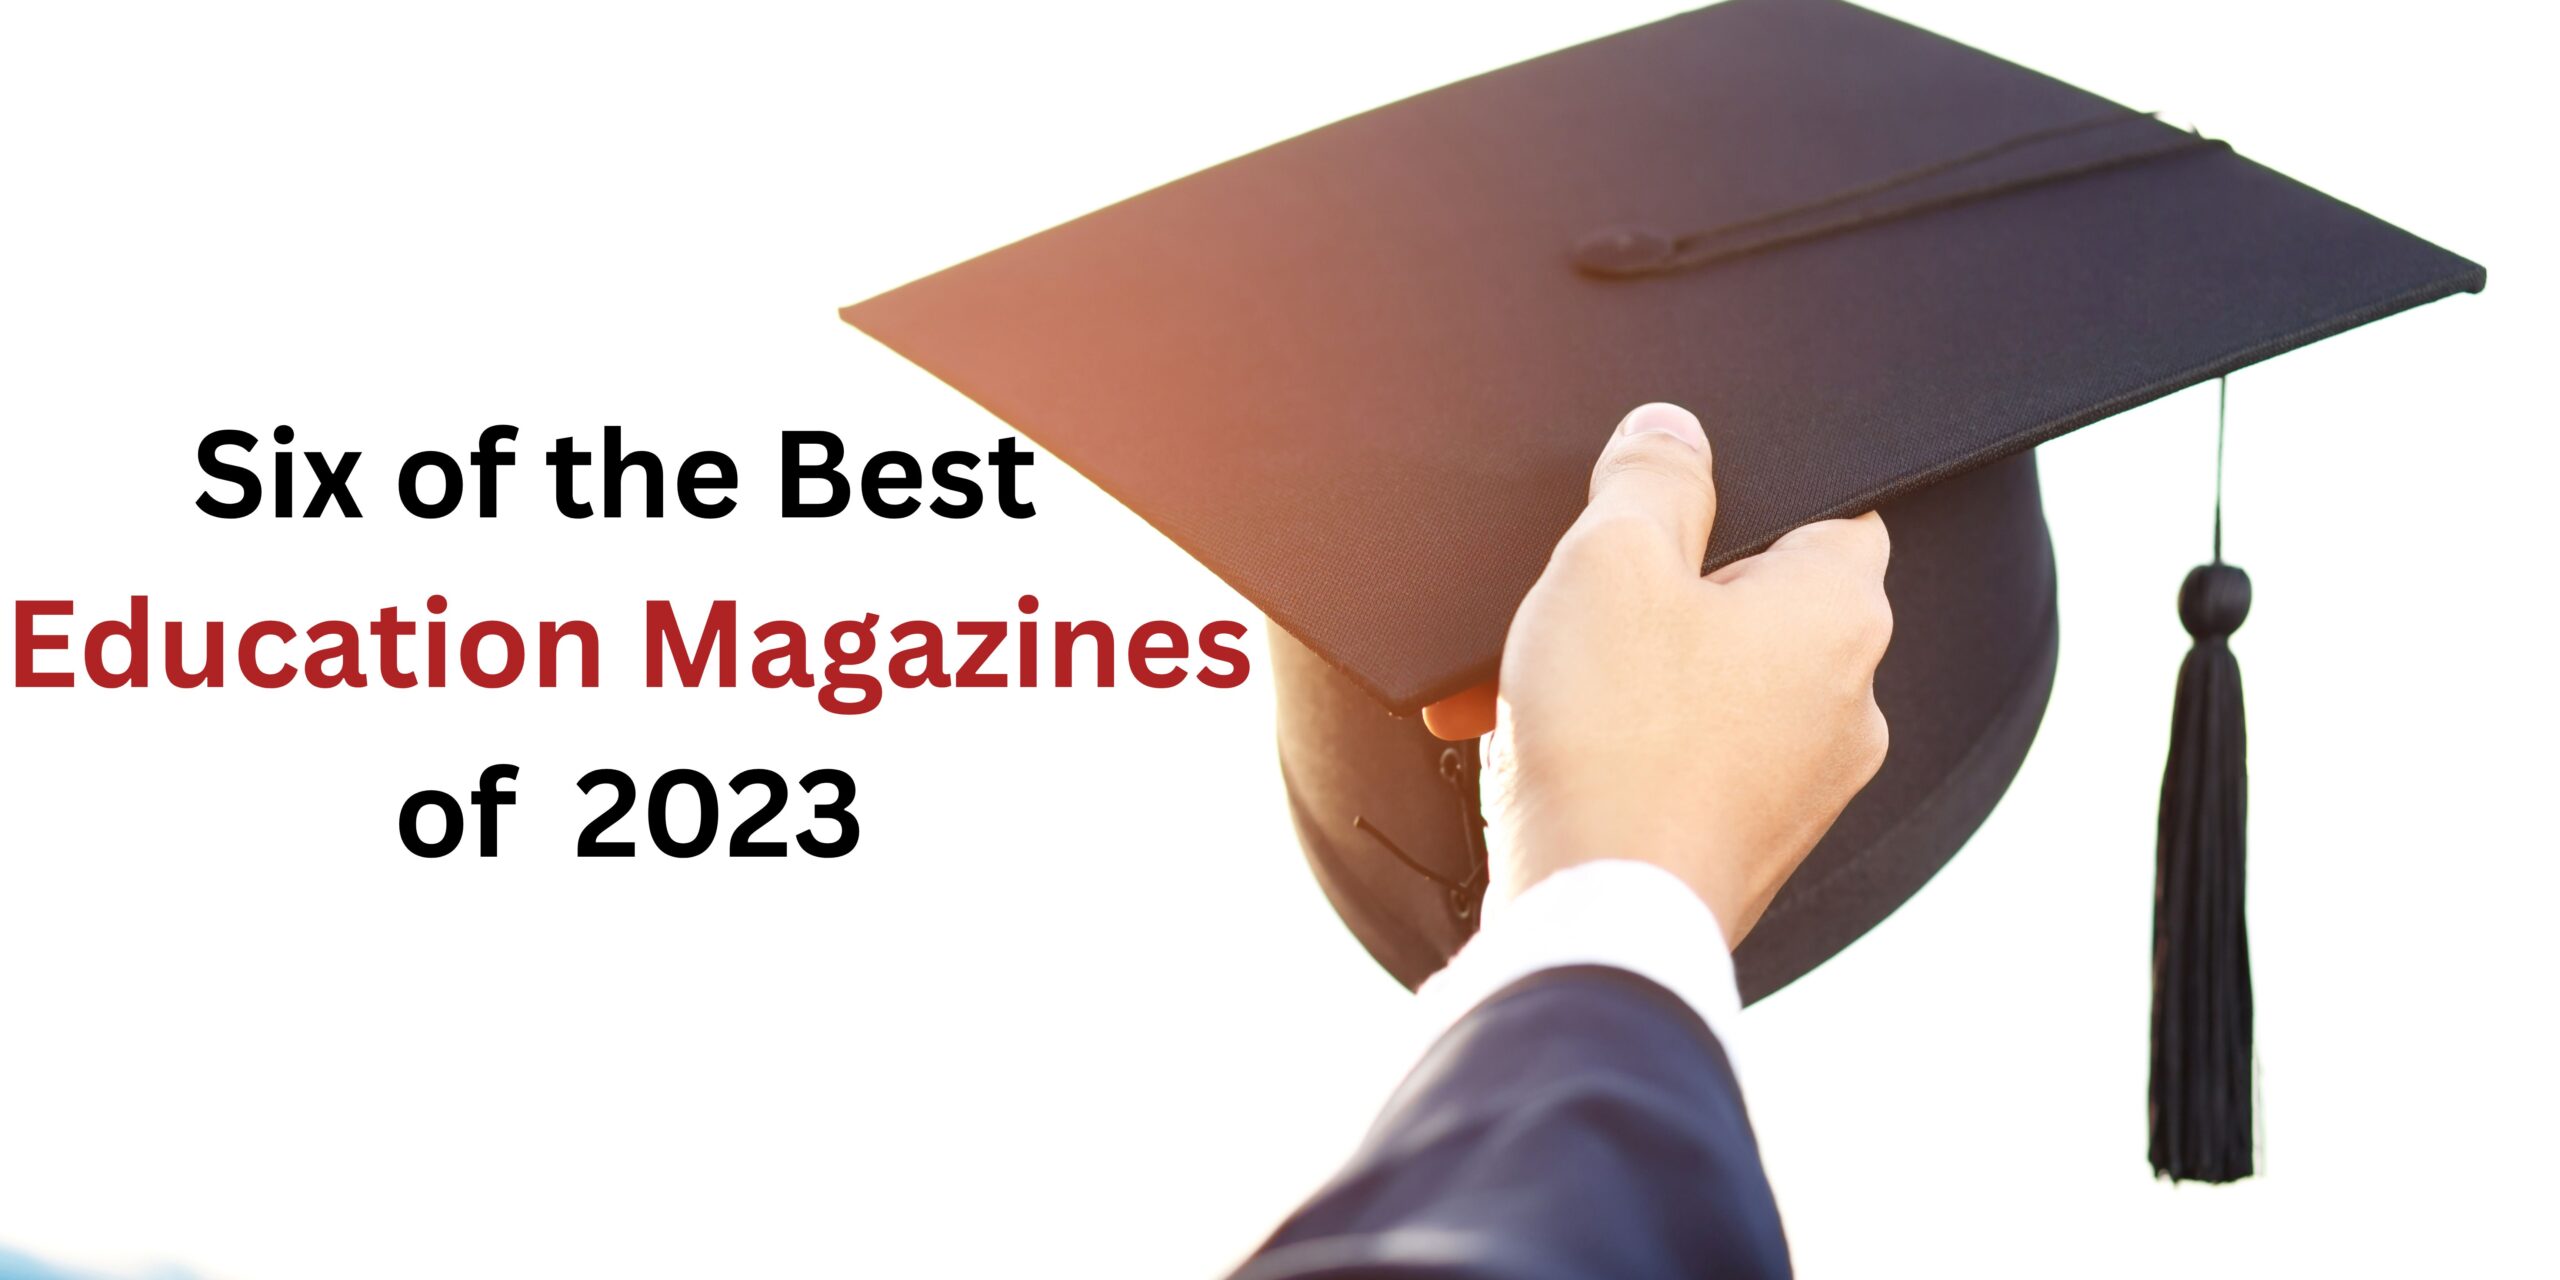 Six of the best education magazines of 2023!